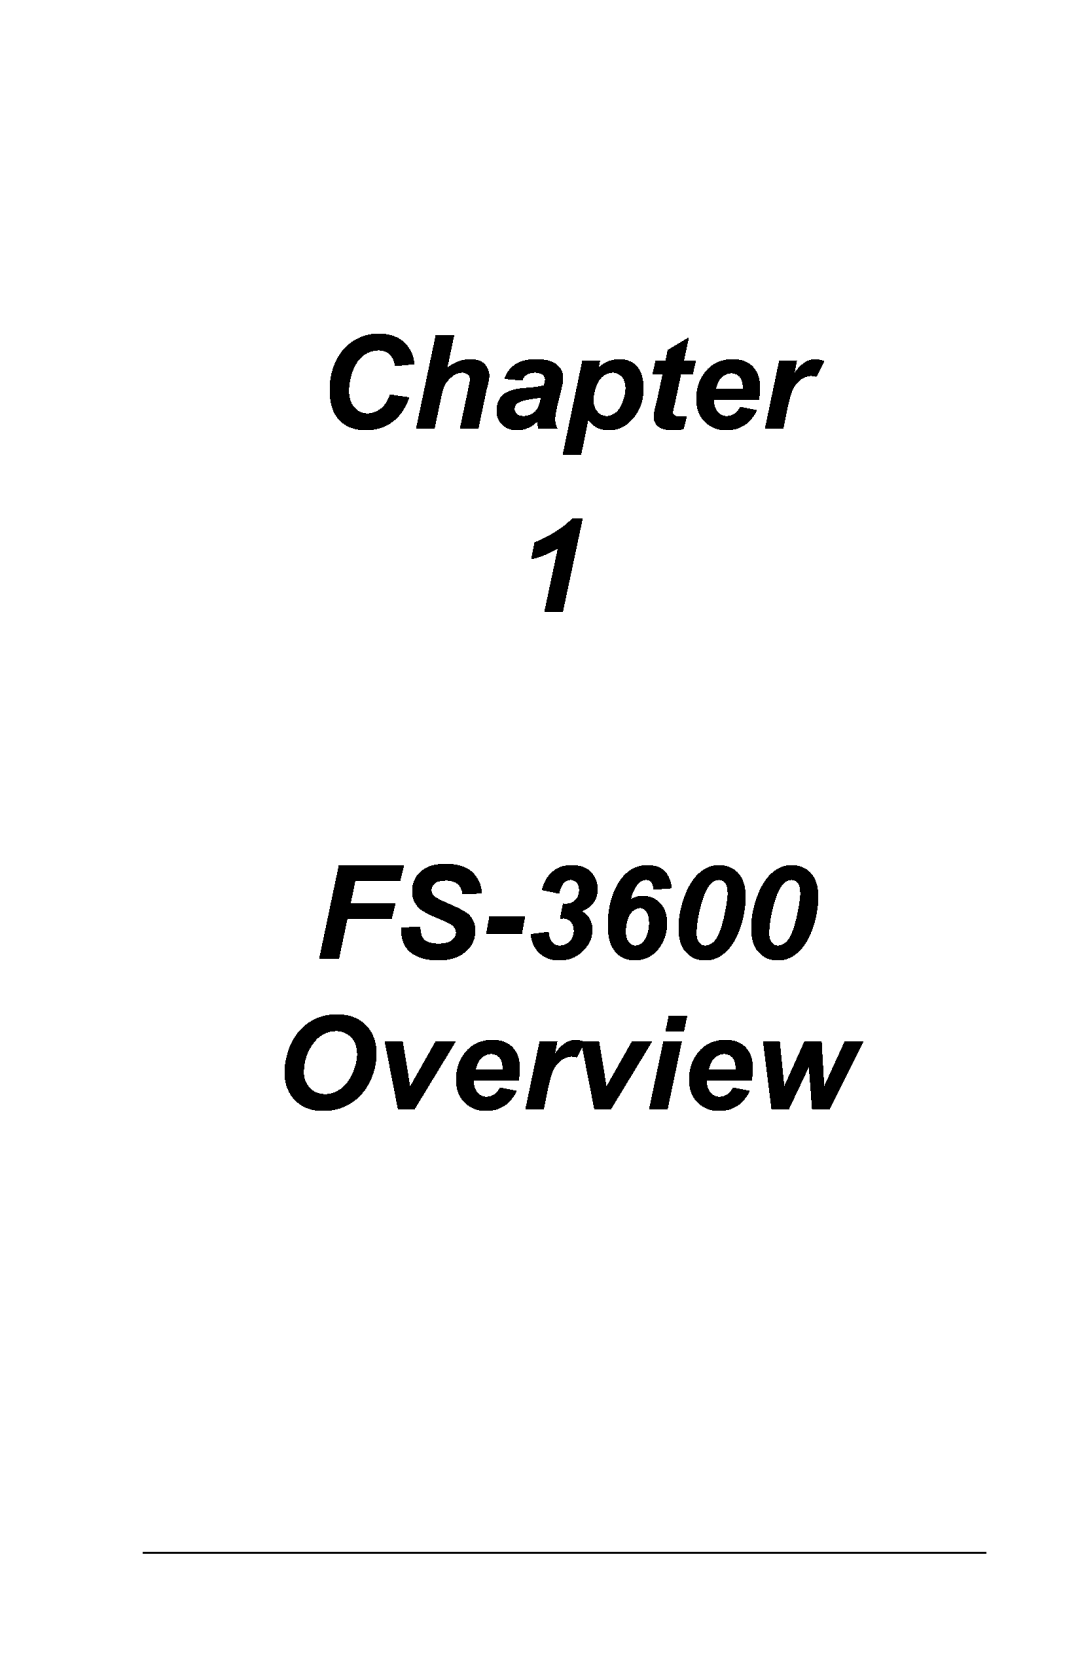 Toshiba owner manual Chapter FS-3600 Overview 